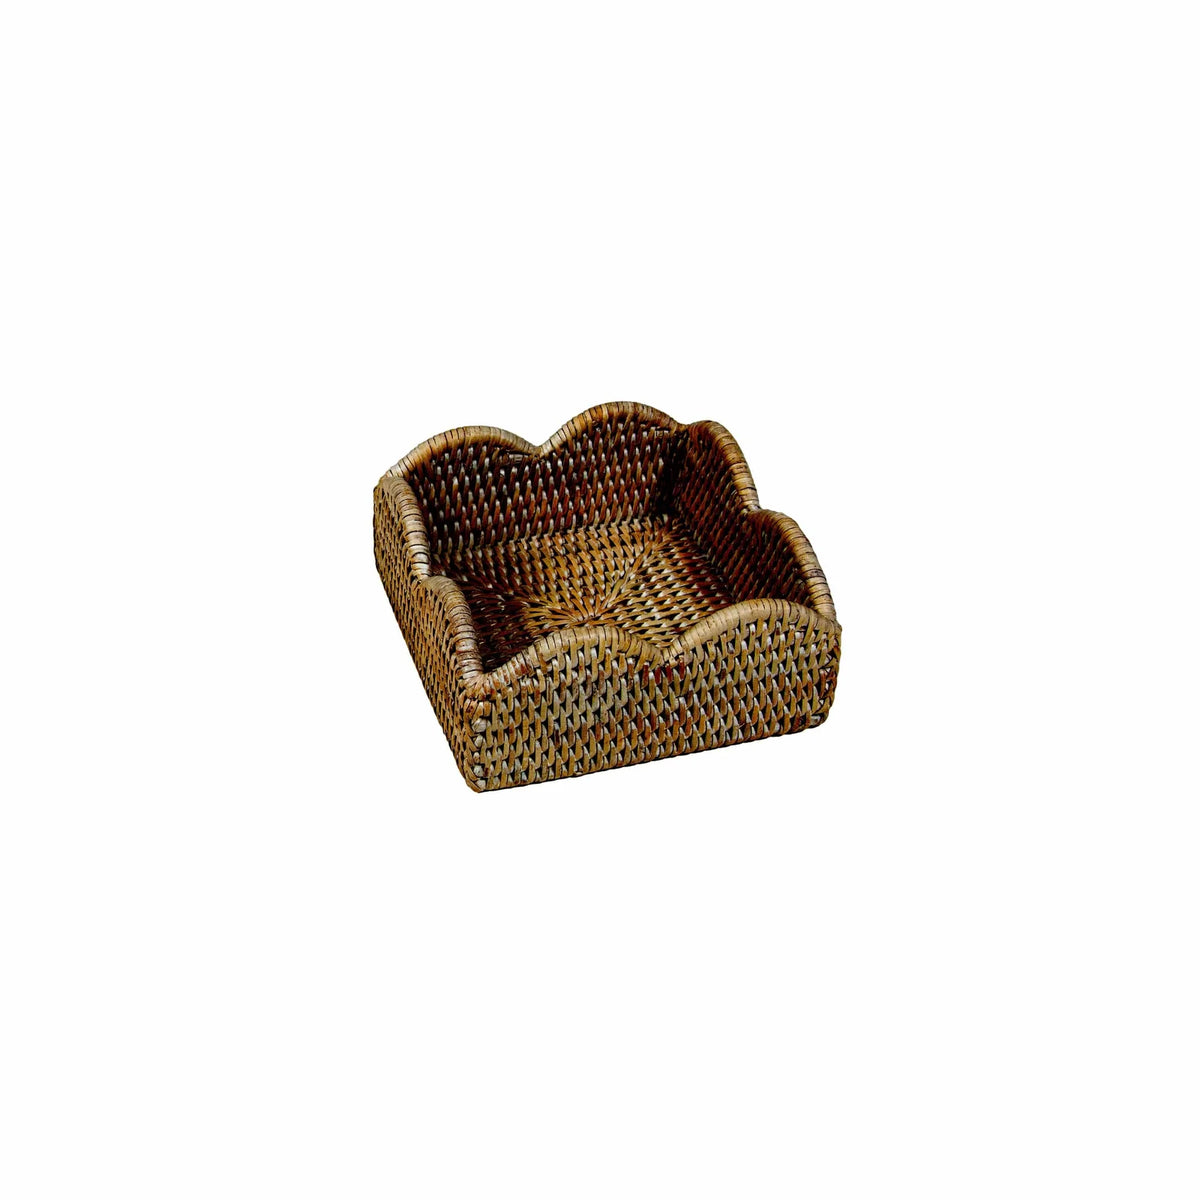 Rattan Scalloped Cocktail Napkin Holders in Natural